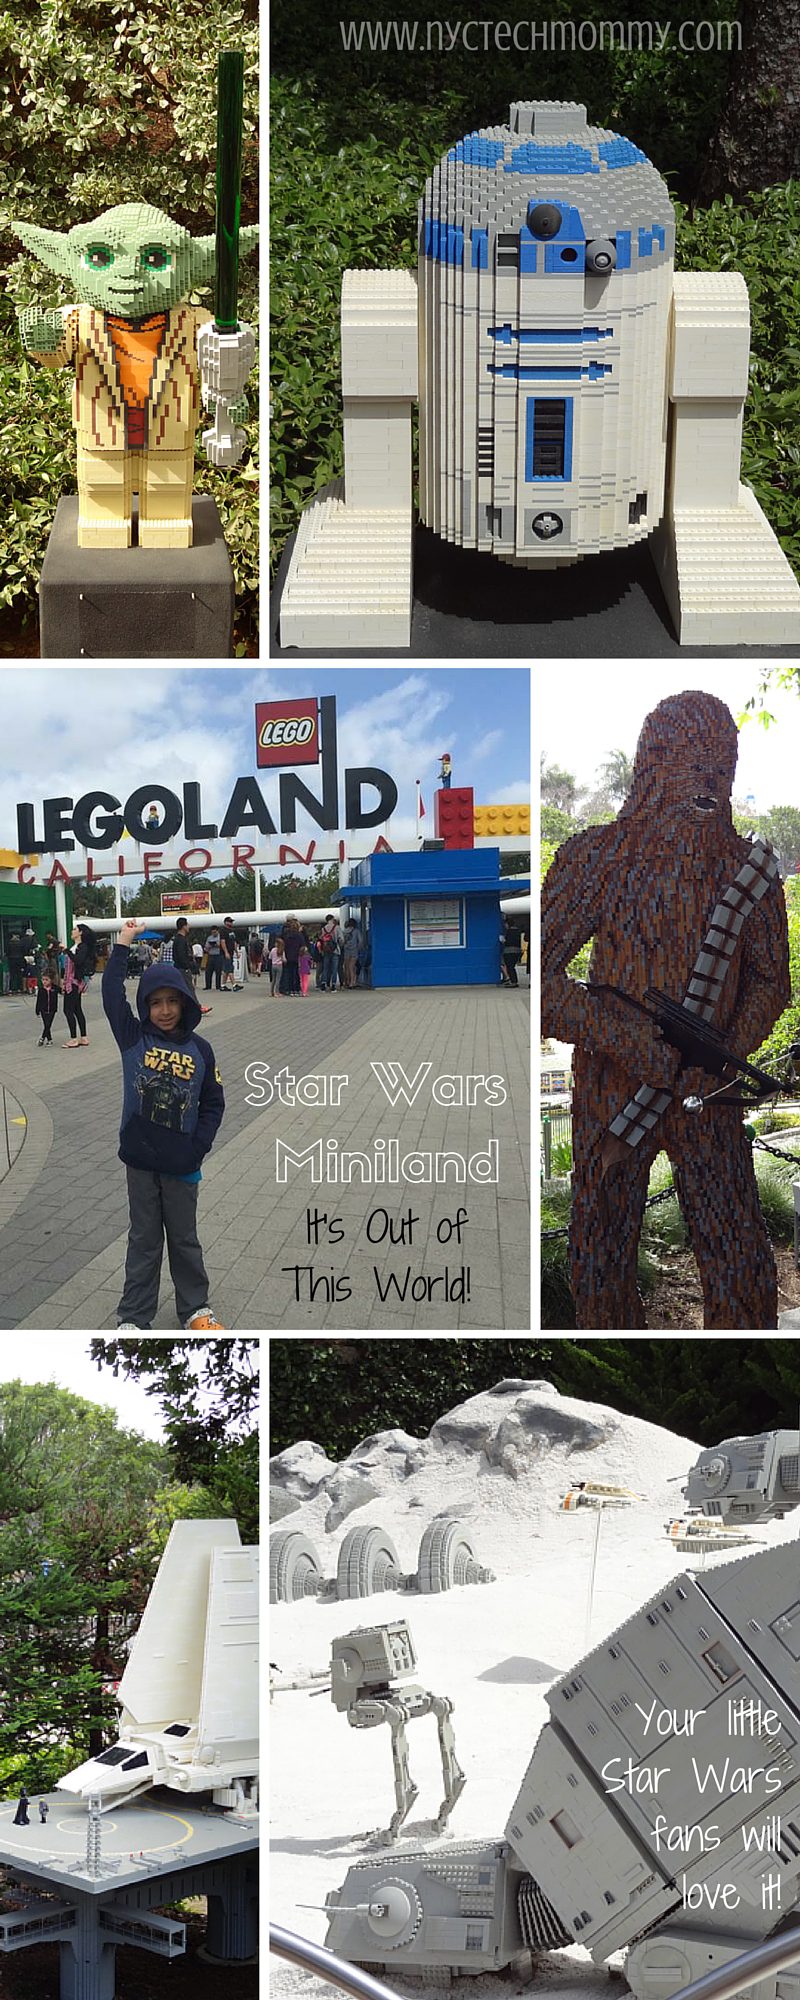 Don't miss an out of this world experience at Legoland California - Iconic Star Wars movie scenes and favorite characters made out of 1.5 million LEGO bricks built in 1:20 scale - Check out pics and details from our recent trip!